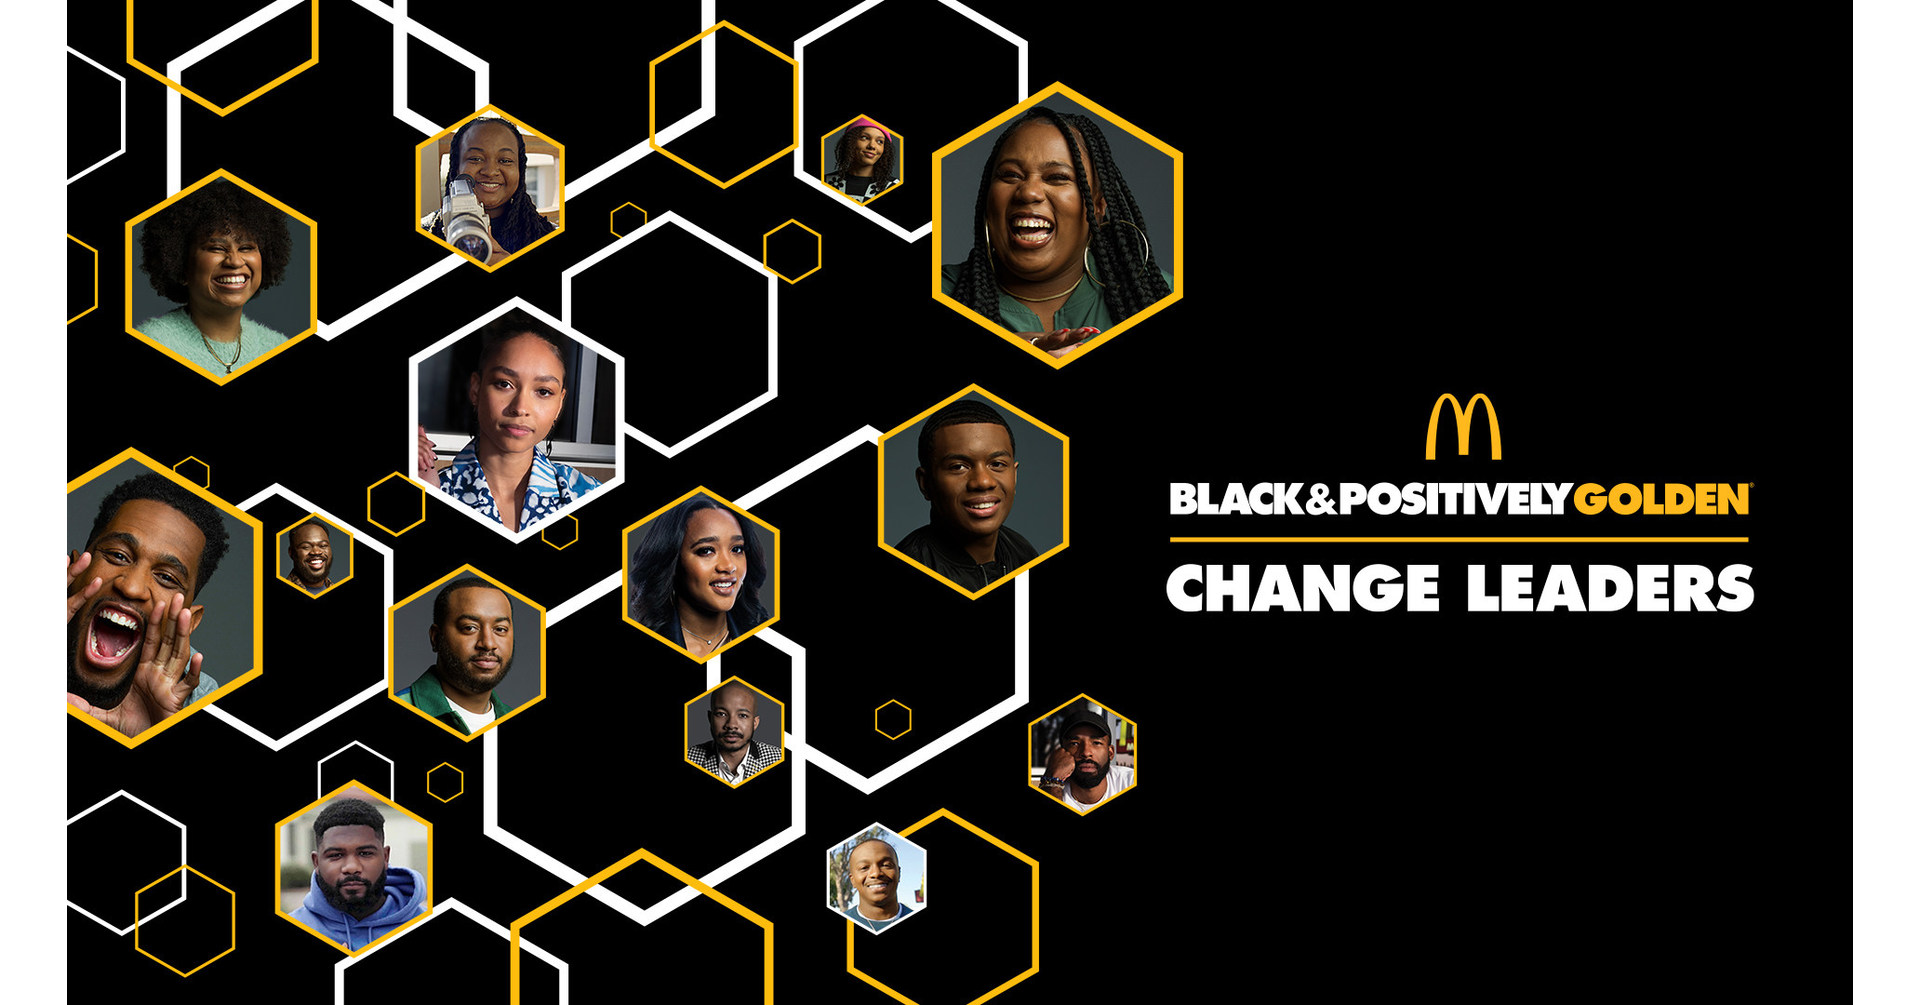 McDonald's USA Continues Empowering and Supporting Black Community and